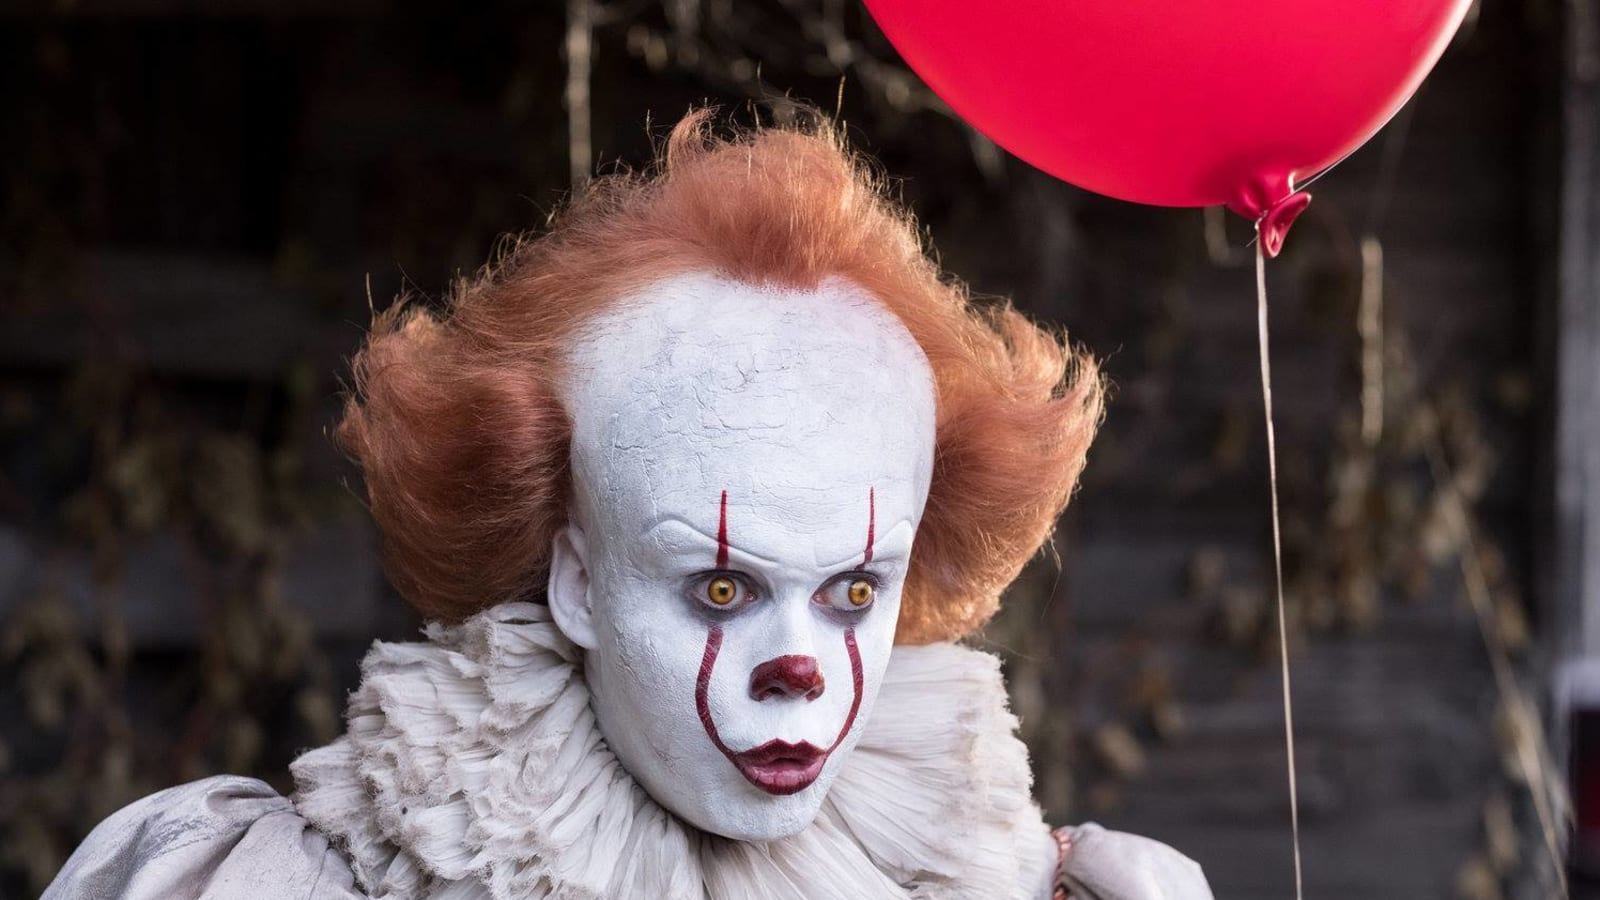 Best Horror Films And Franchises Featuring Scary Clowns Yardbarker